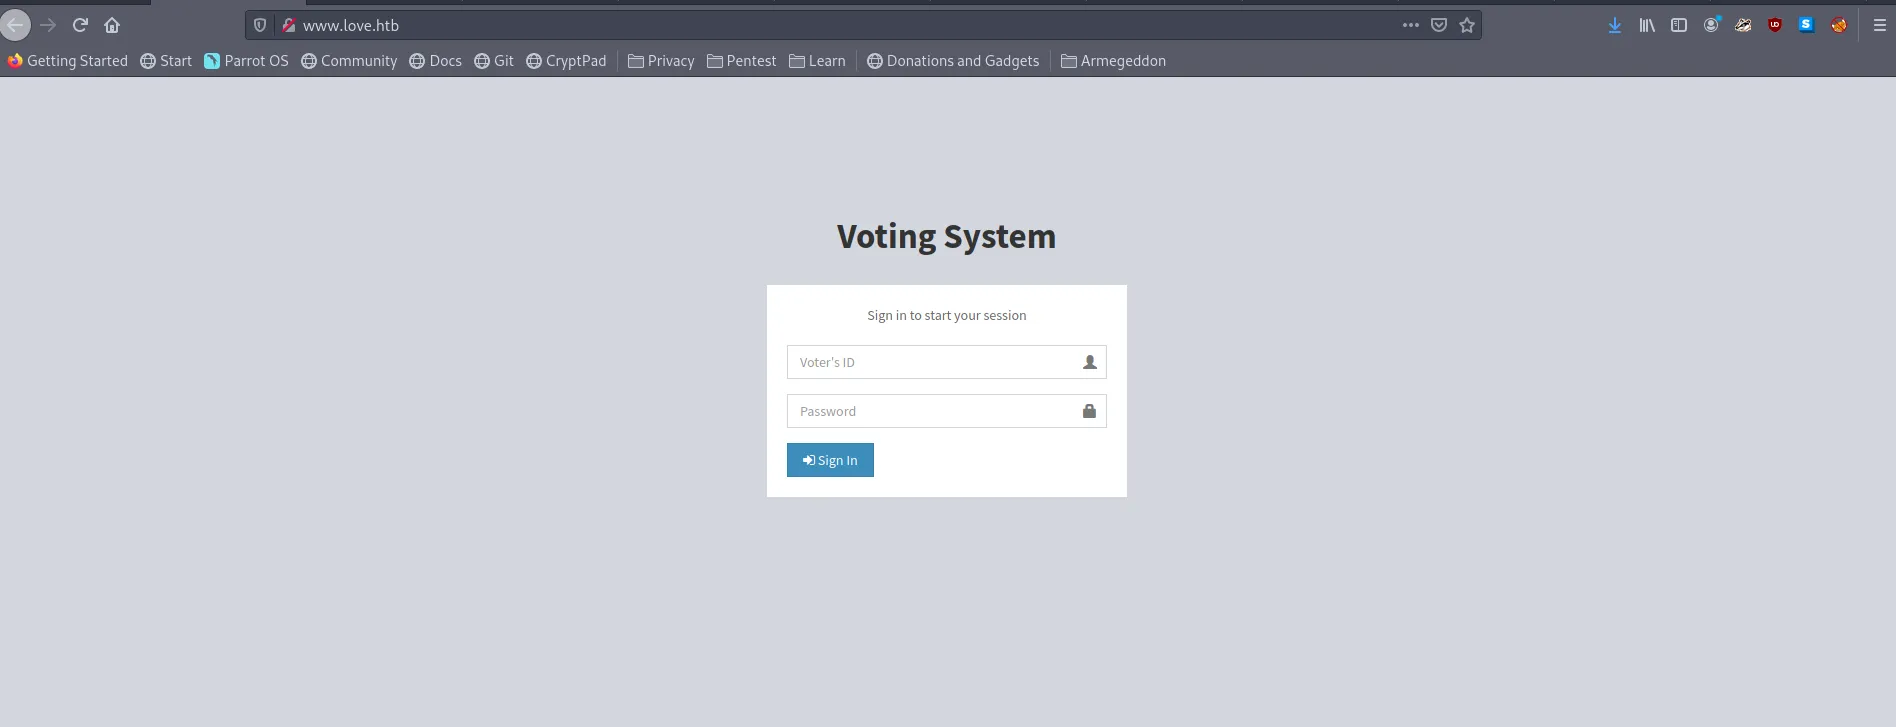 Voting System On WWW